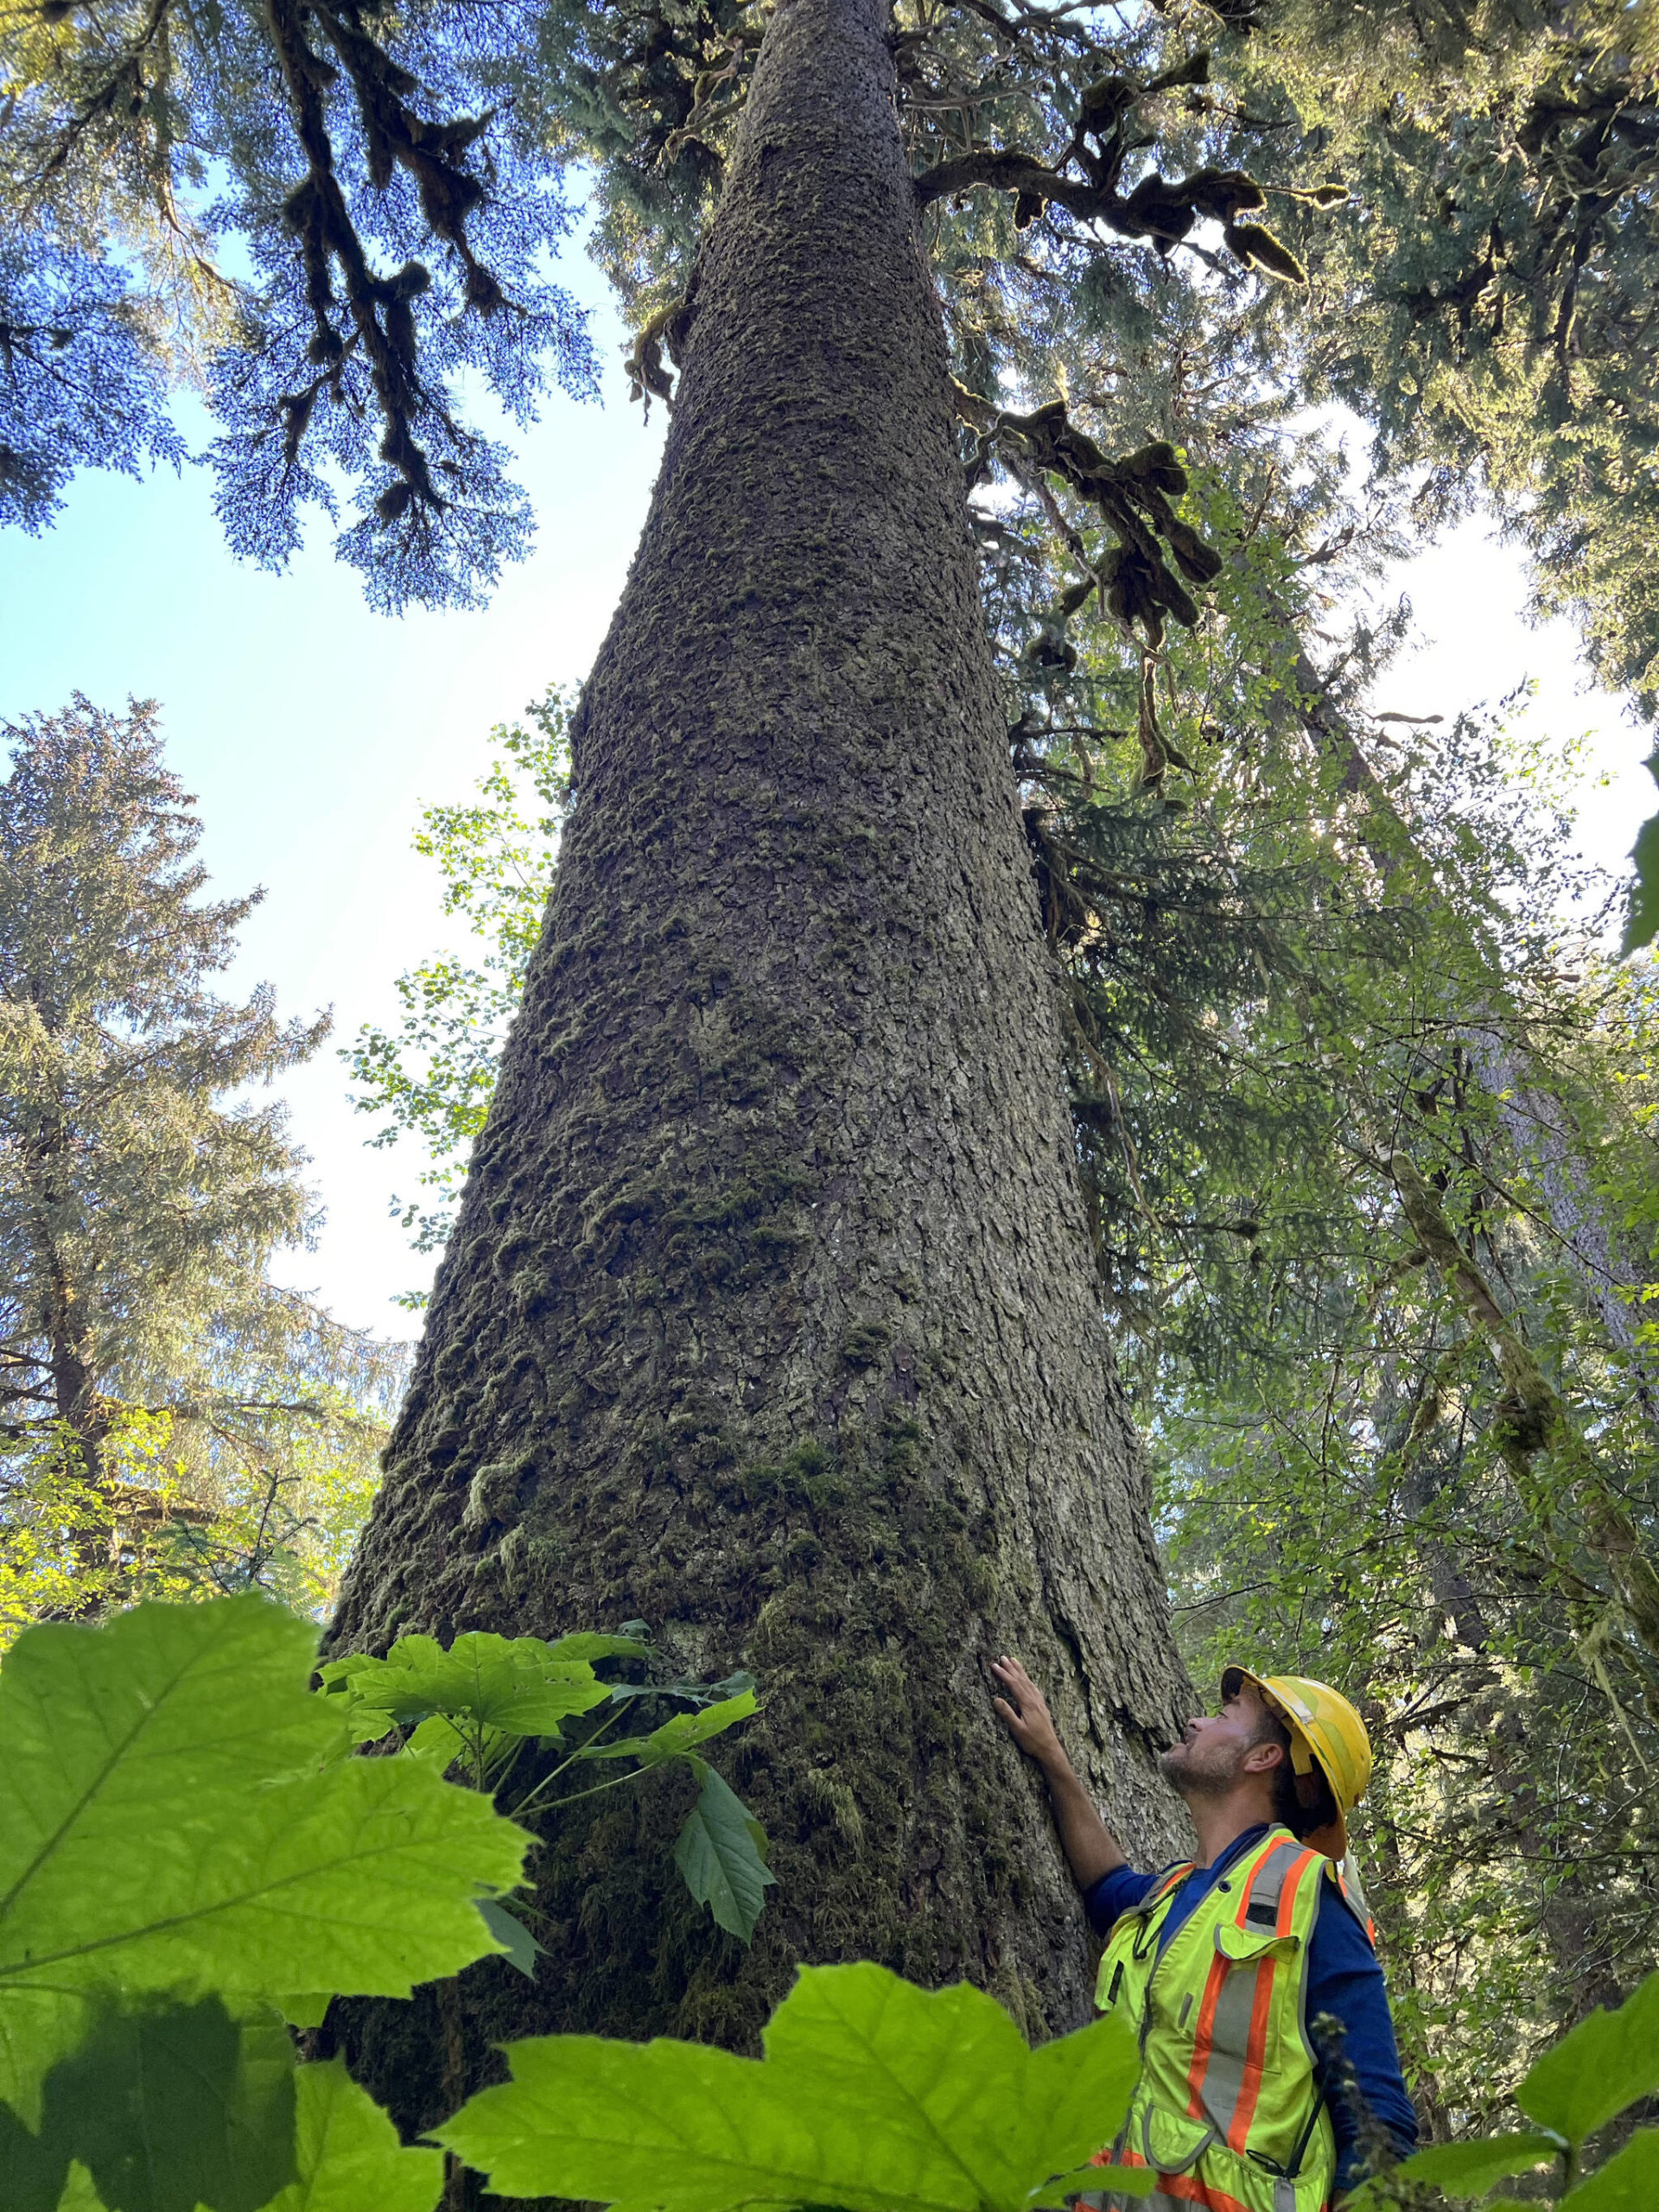 U.S. Forest Service fish biologist Eric Castro stands next to what is said to be the largest tree remaining on Mitkof Island, in the East Ohmer Creek watershed. It’s just downstream of the restoration project Castro took part in this summer. (Mary Catharine Martin / SalmonState)